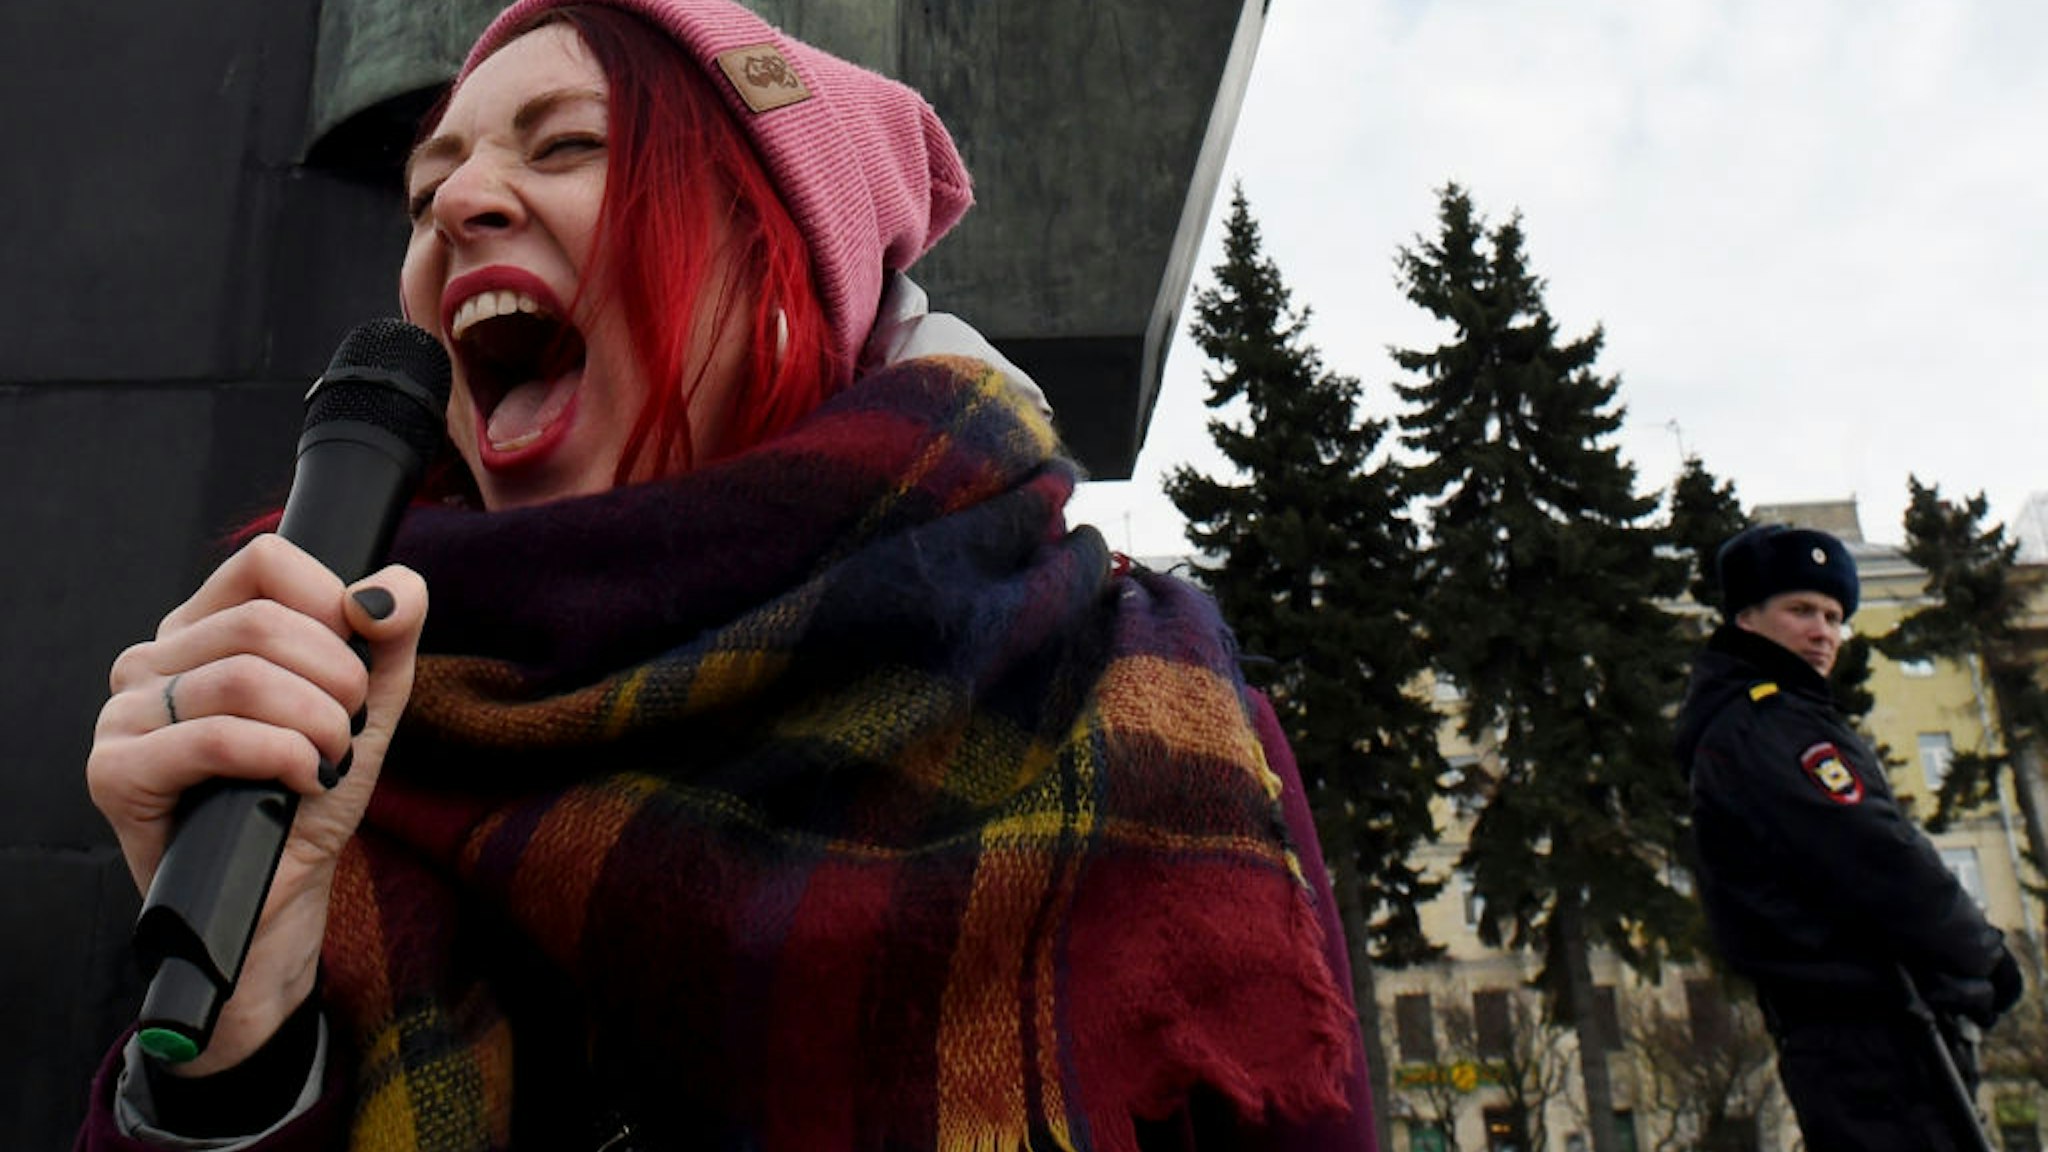 A feminist activist shouts slogans in a microphone during a rally for gender equality and women's rights in Saint Petersburg, on March 8, 2019, as International Women's Day is being celebrated around the world.